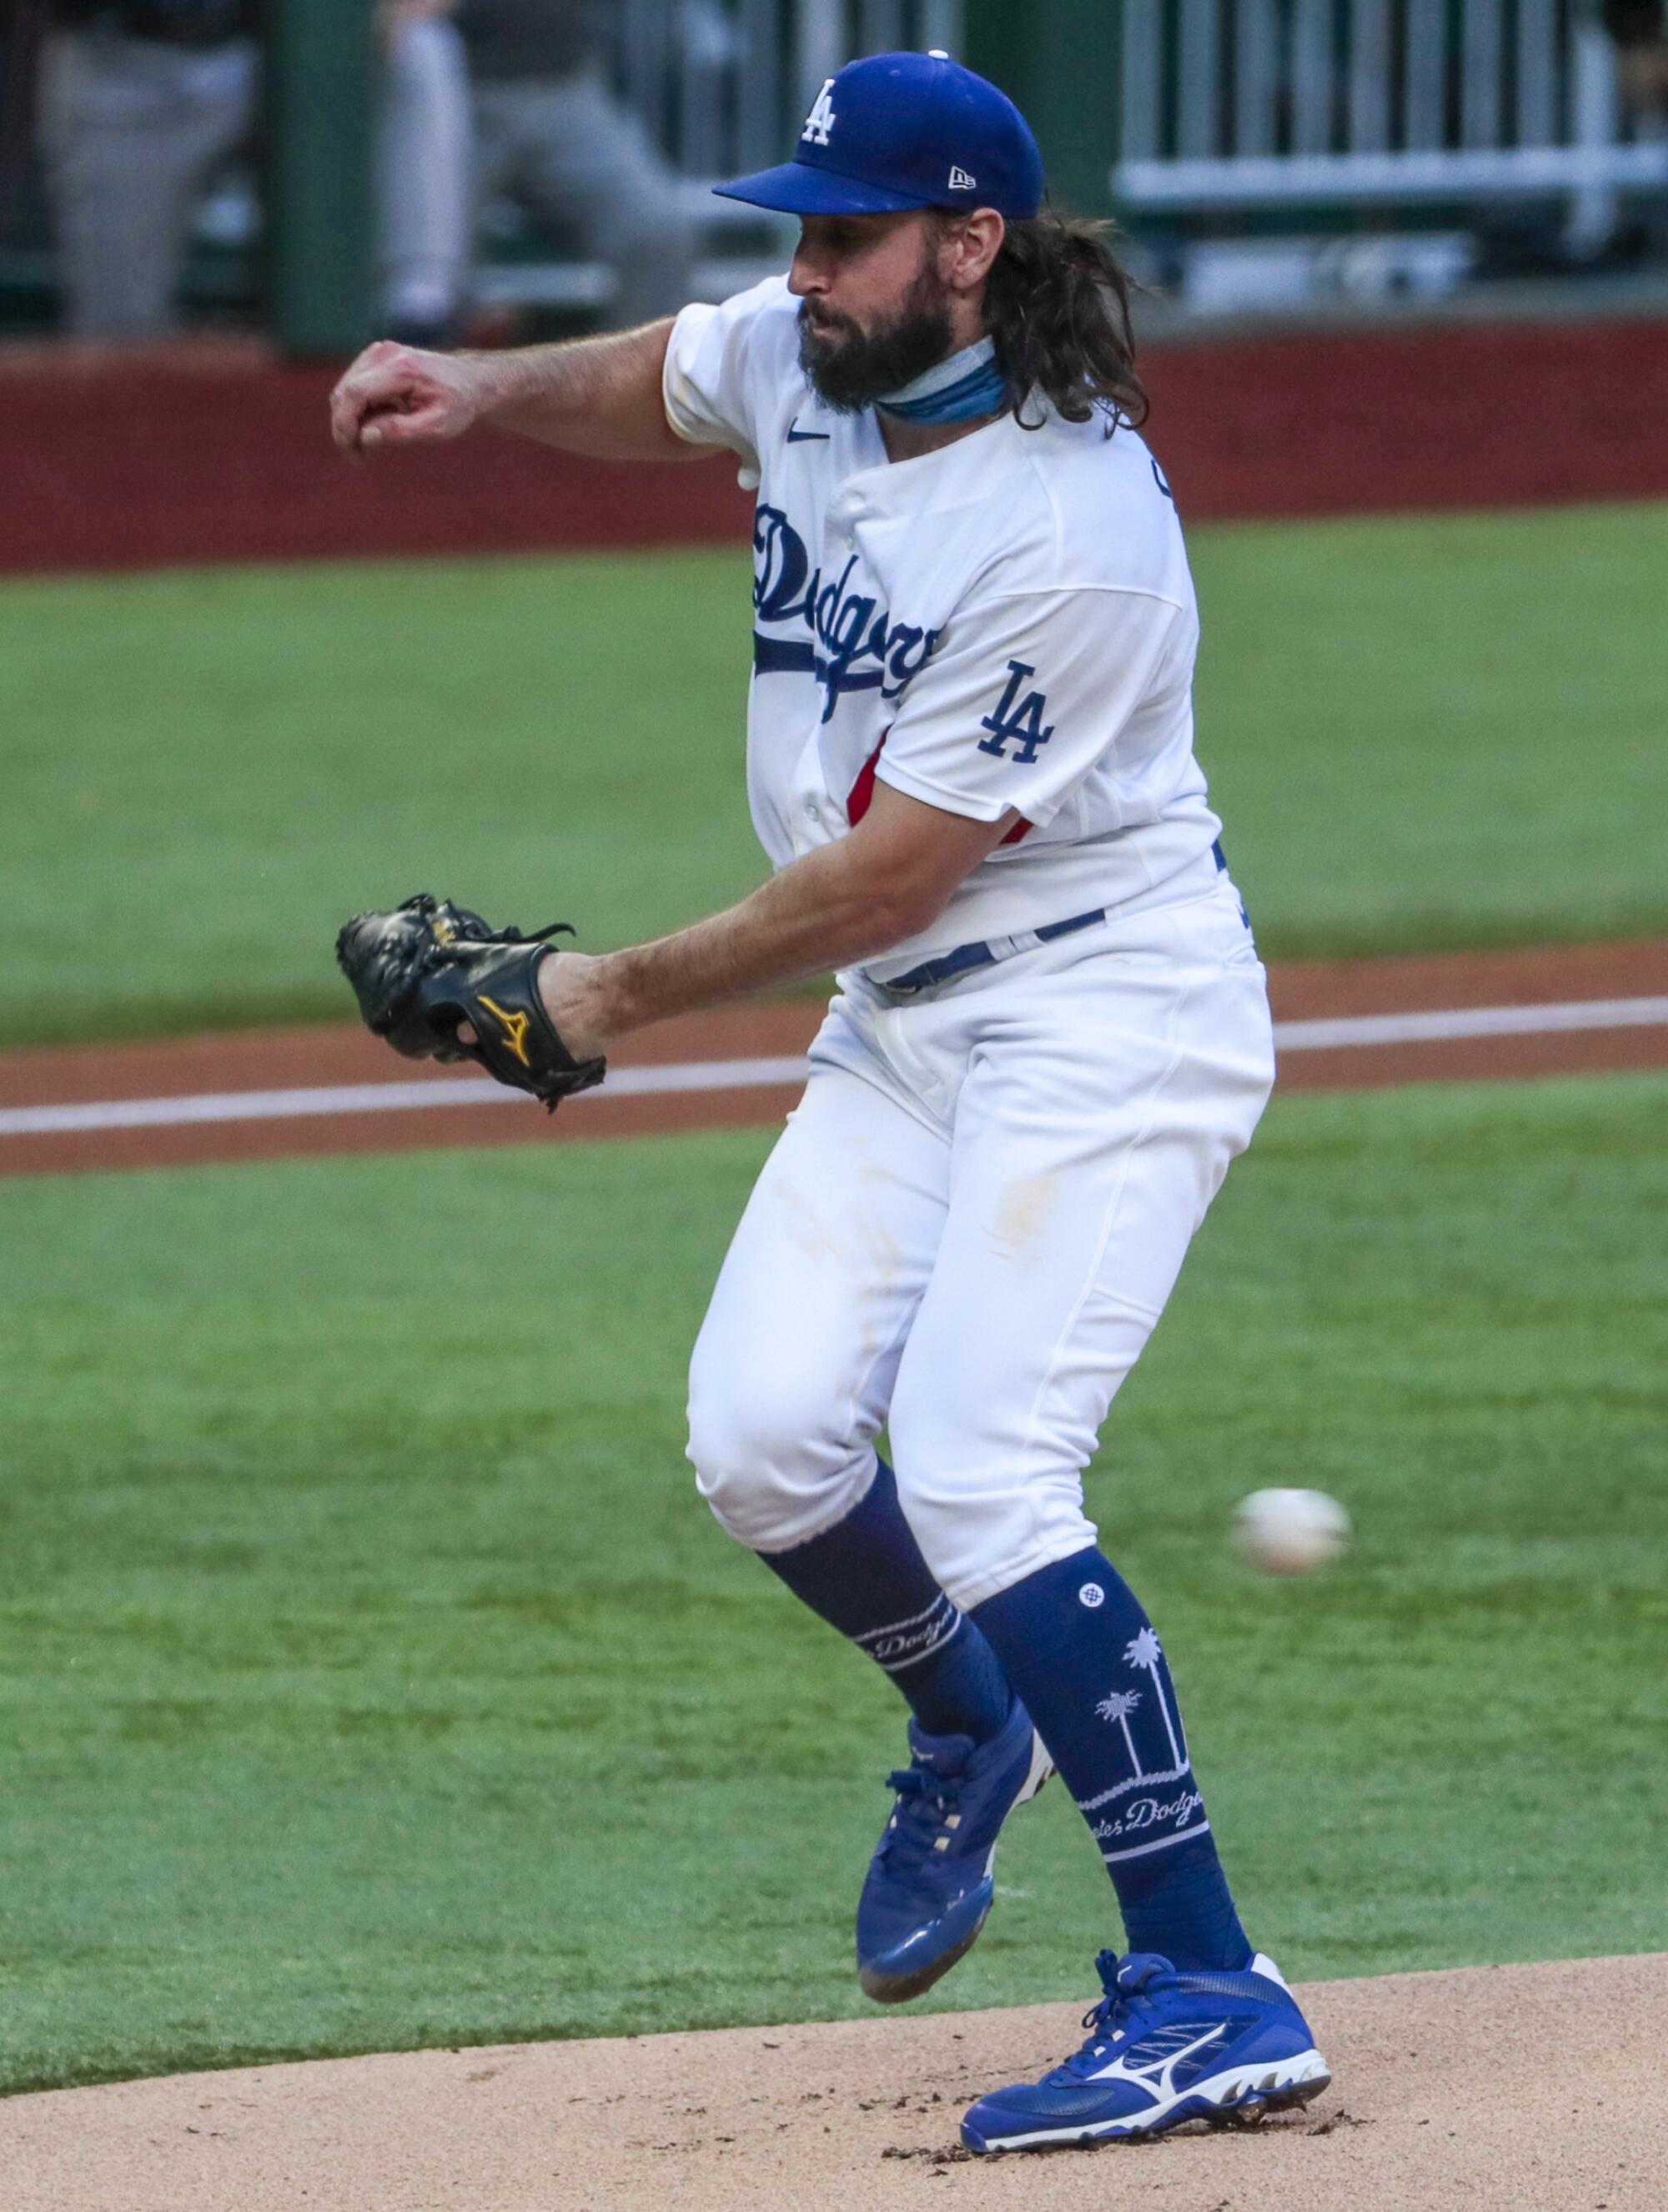 Dodgers starting pitcher Tony Gonsolin avoids a comebacker hit by Atlanta's Marcell Ozuna during the first inning.